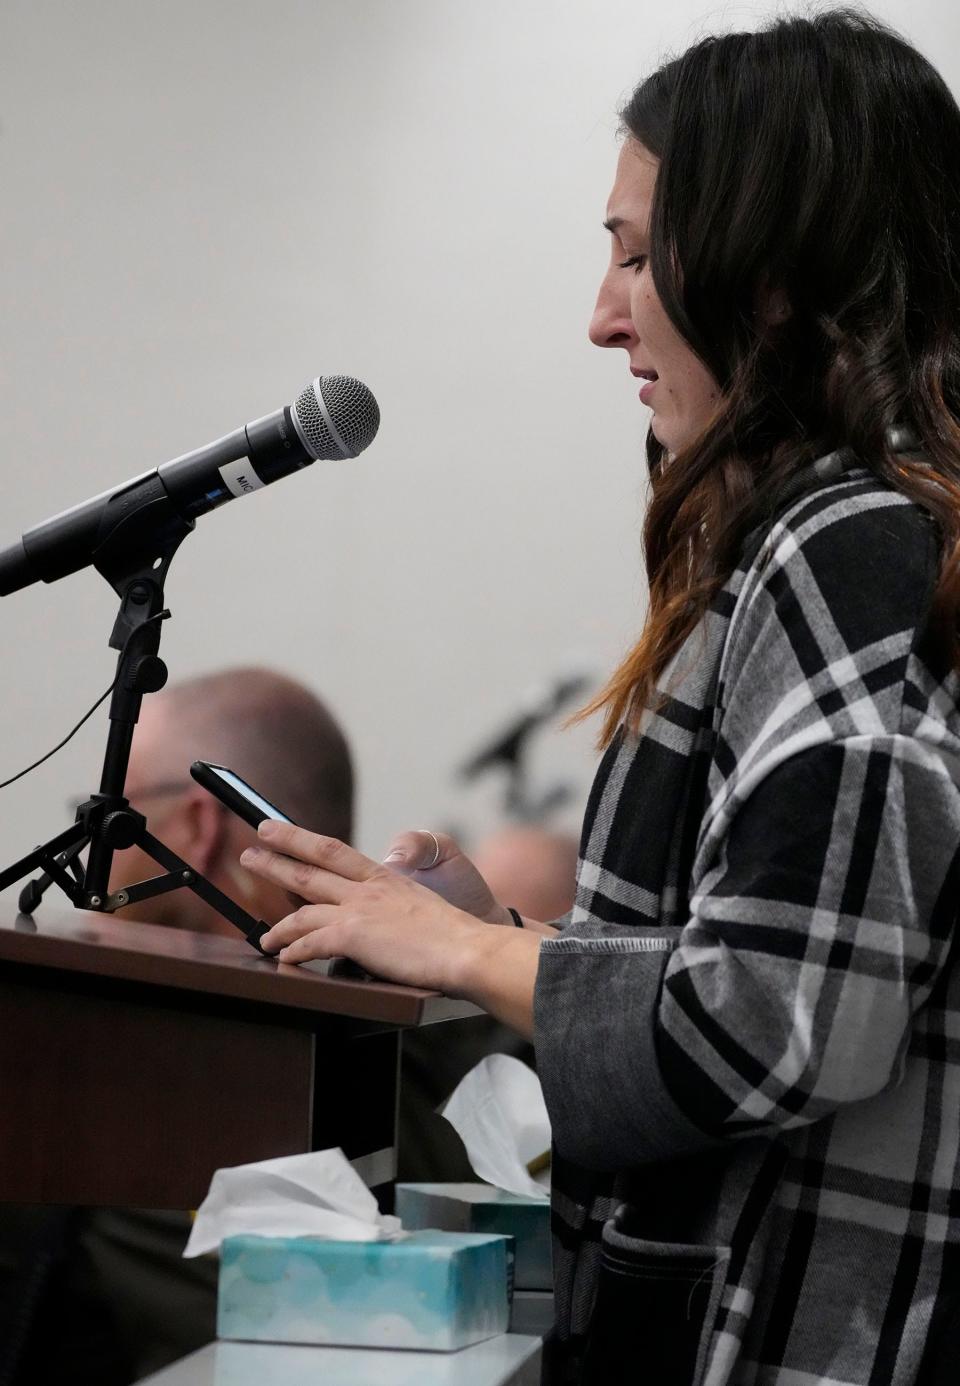 Taylor Kulich, the daughter of of Dancing Granny, Jane Kulich, gives a victim statement during Darrell Brooks sentencing on Tuesday. She said "my smile is not as bright (now)."